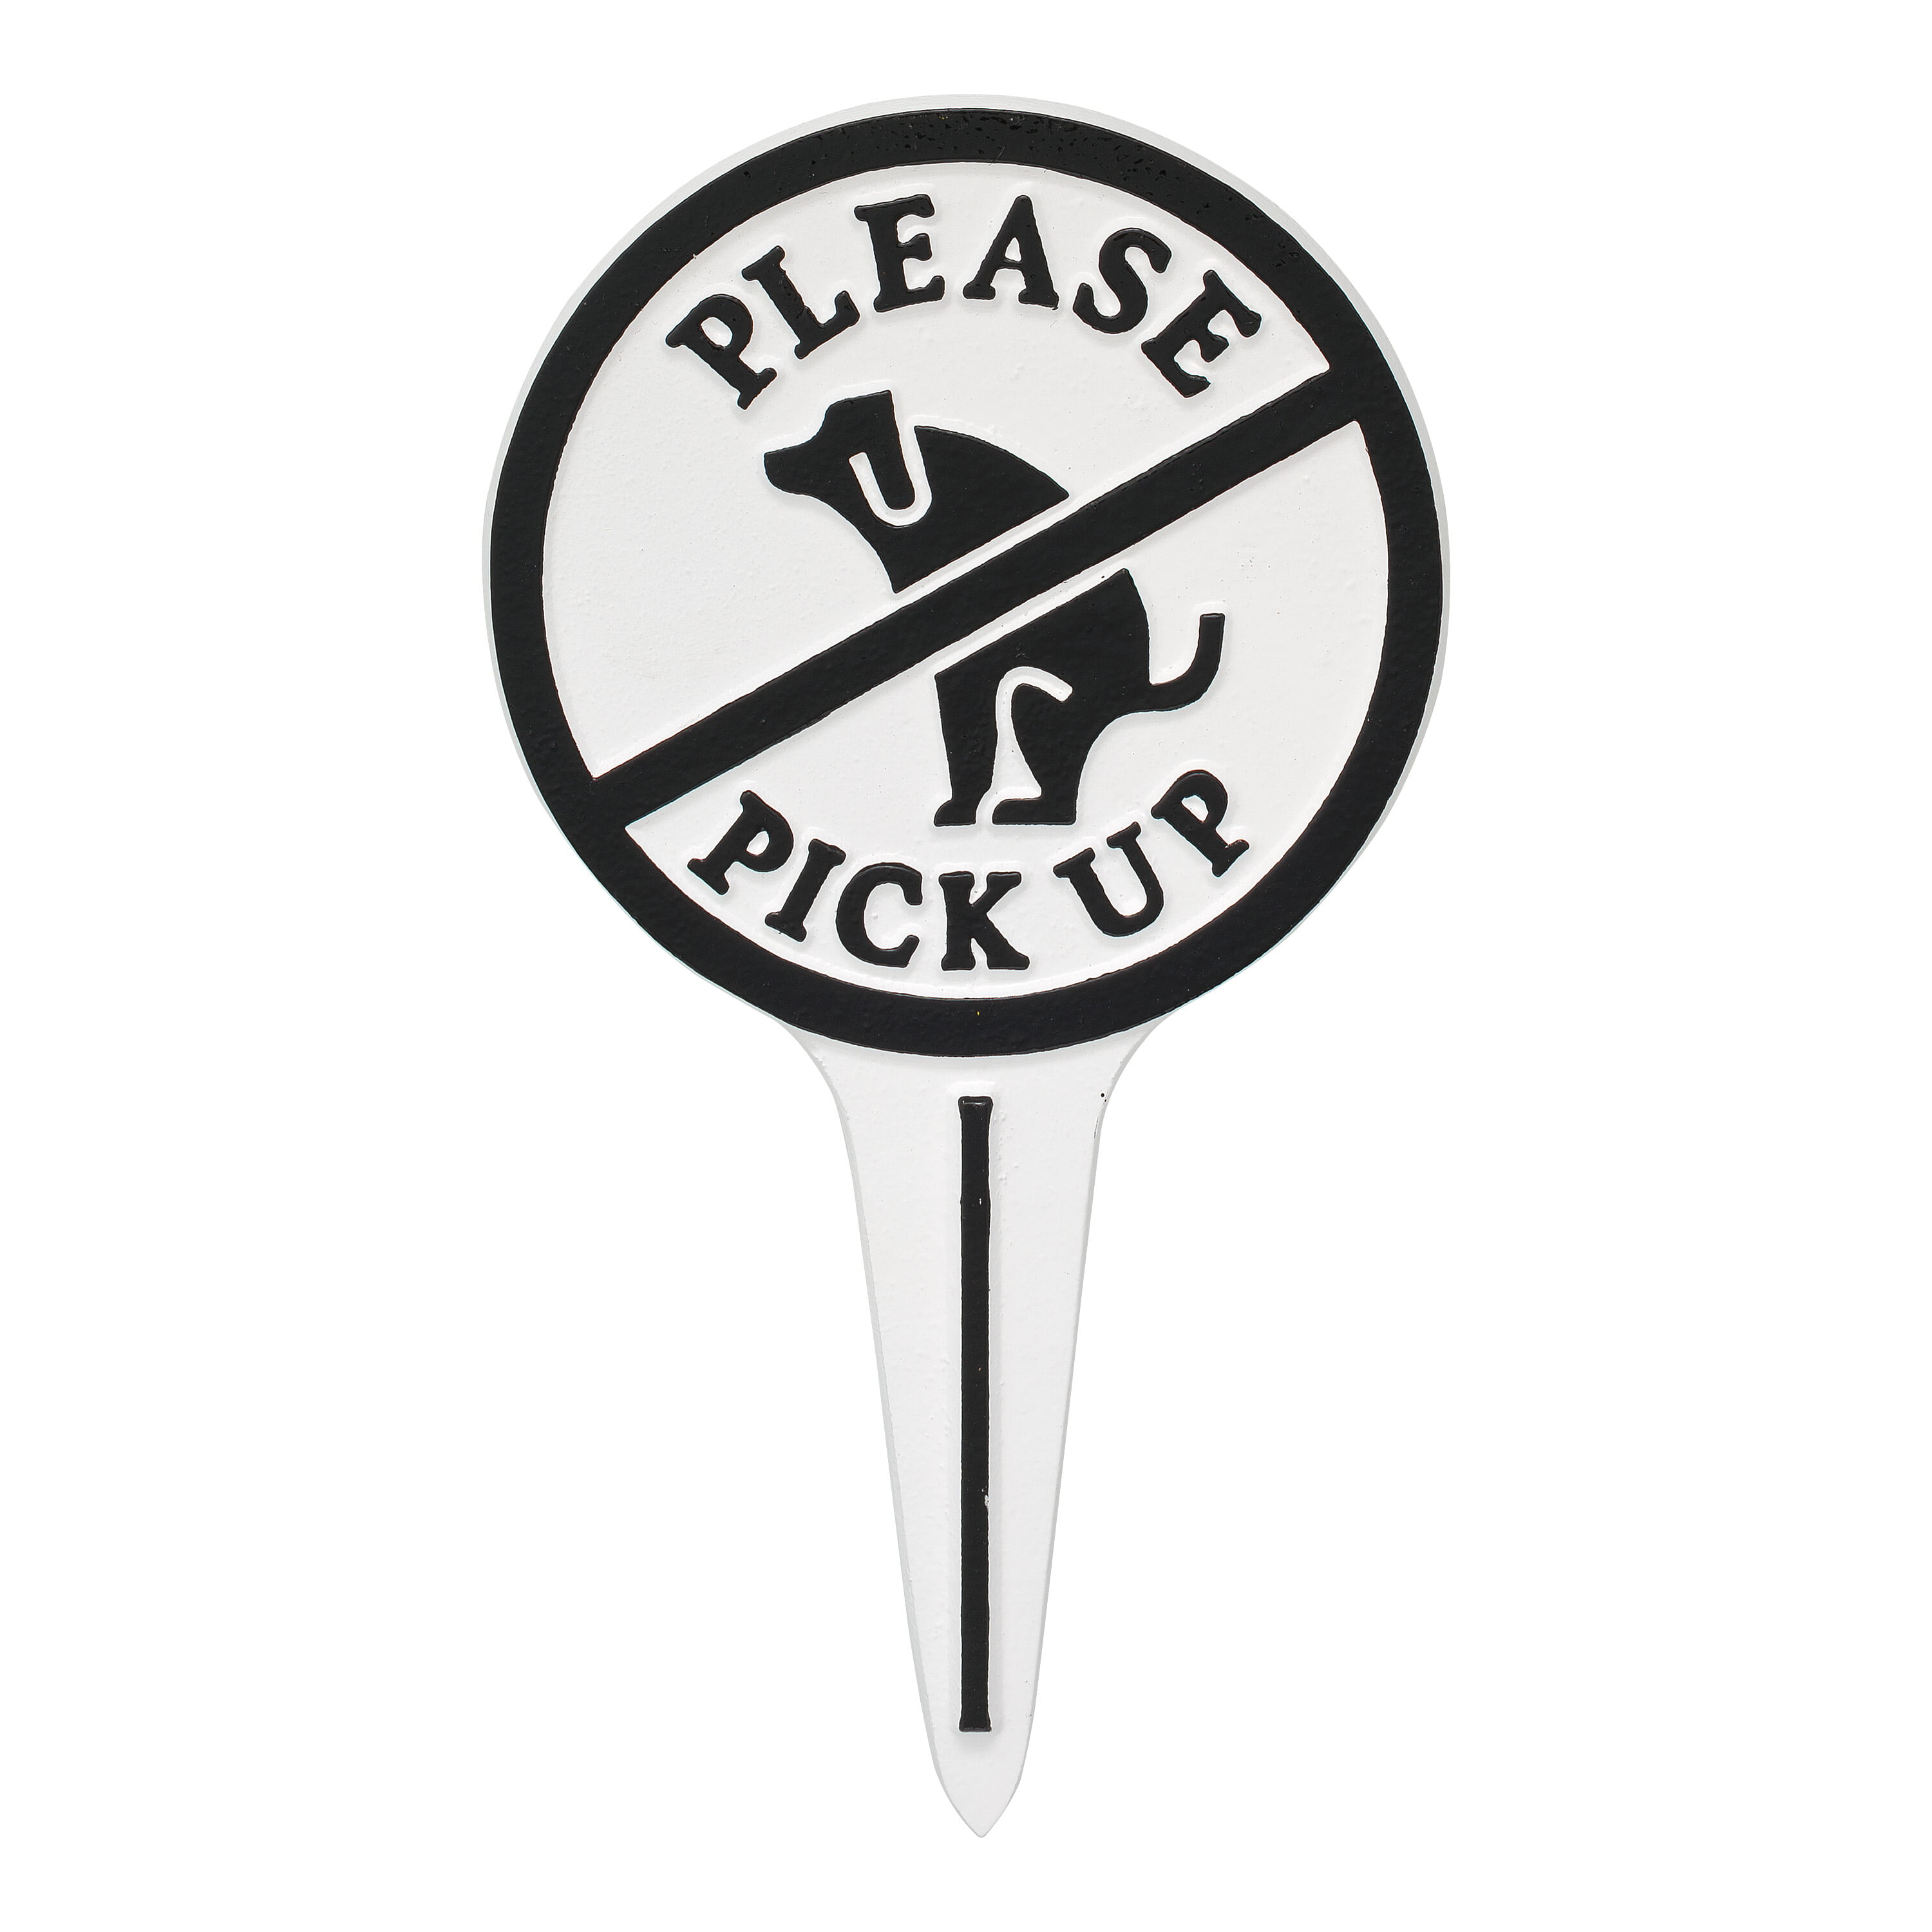 Whitehall Products 10605 Round Courtesy Lawn Stake no Poop Dog Sign 9.5 x 5.25 x 0.25 Green/Gold 